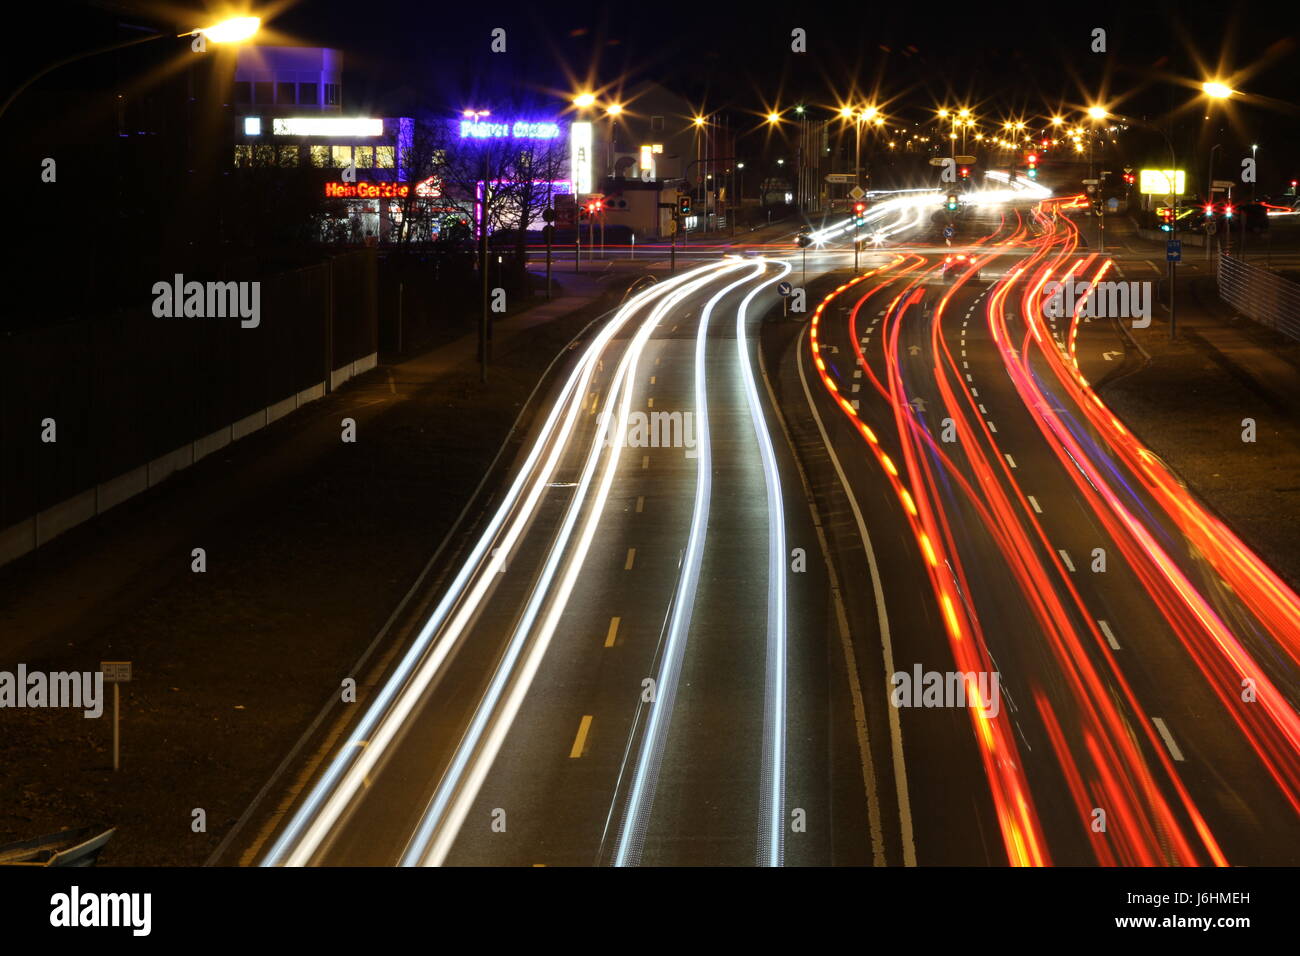 night nighttime lights car automobile vehicle means of travel motor vehicle Stock Photo